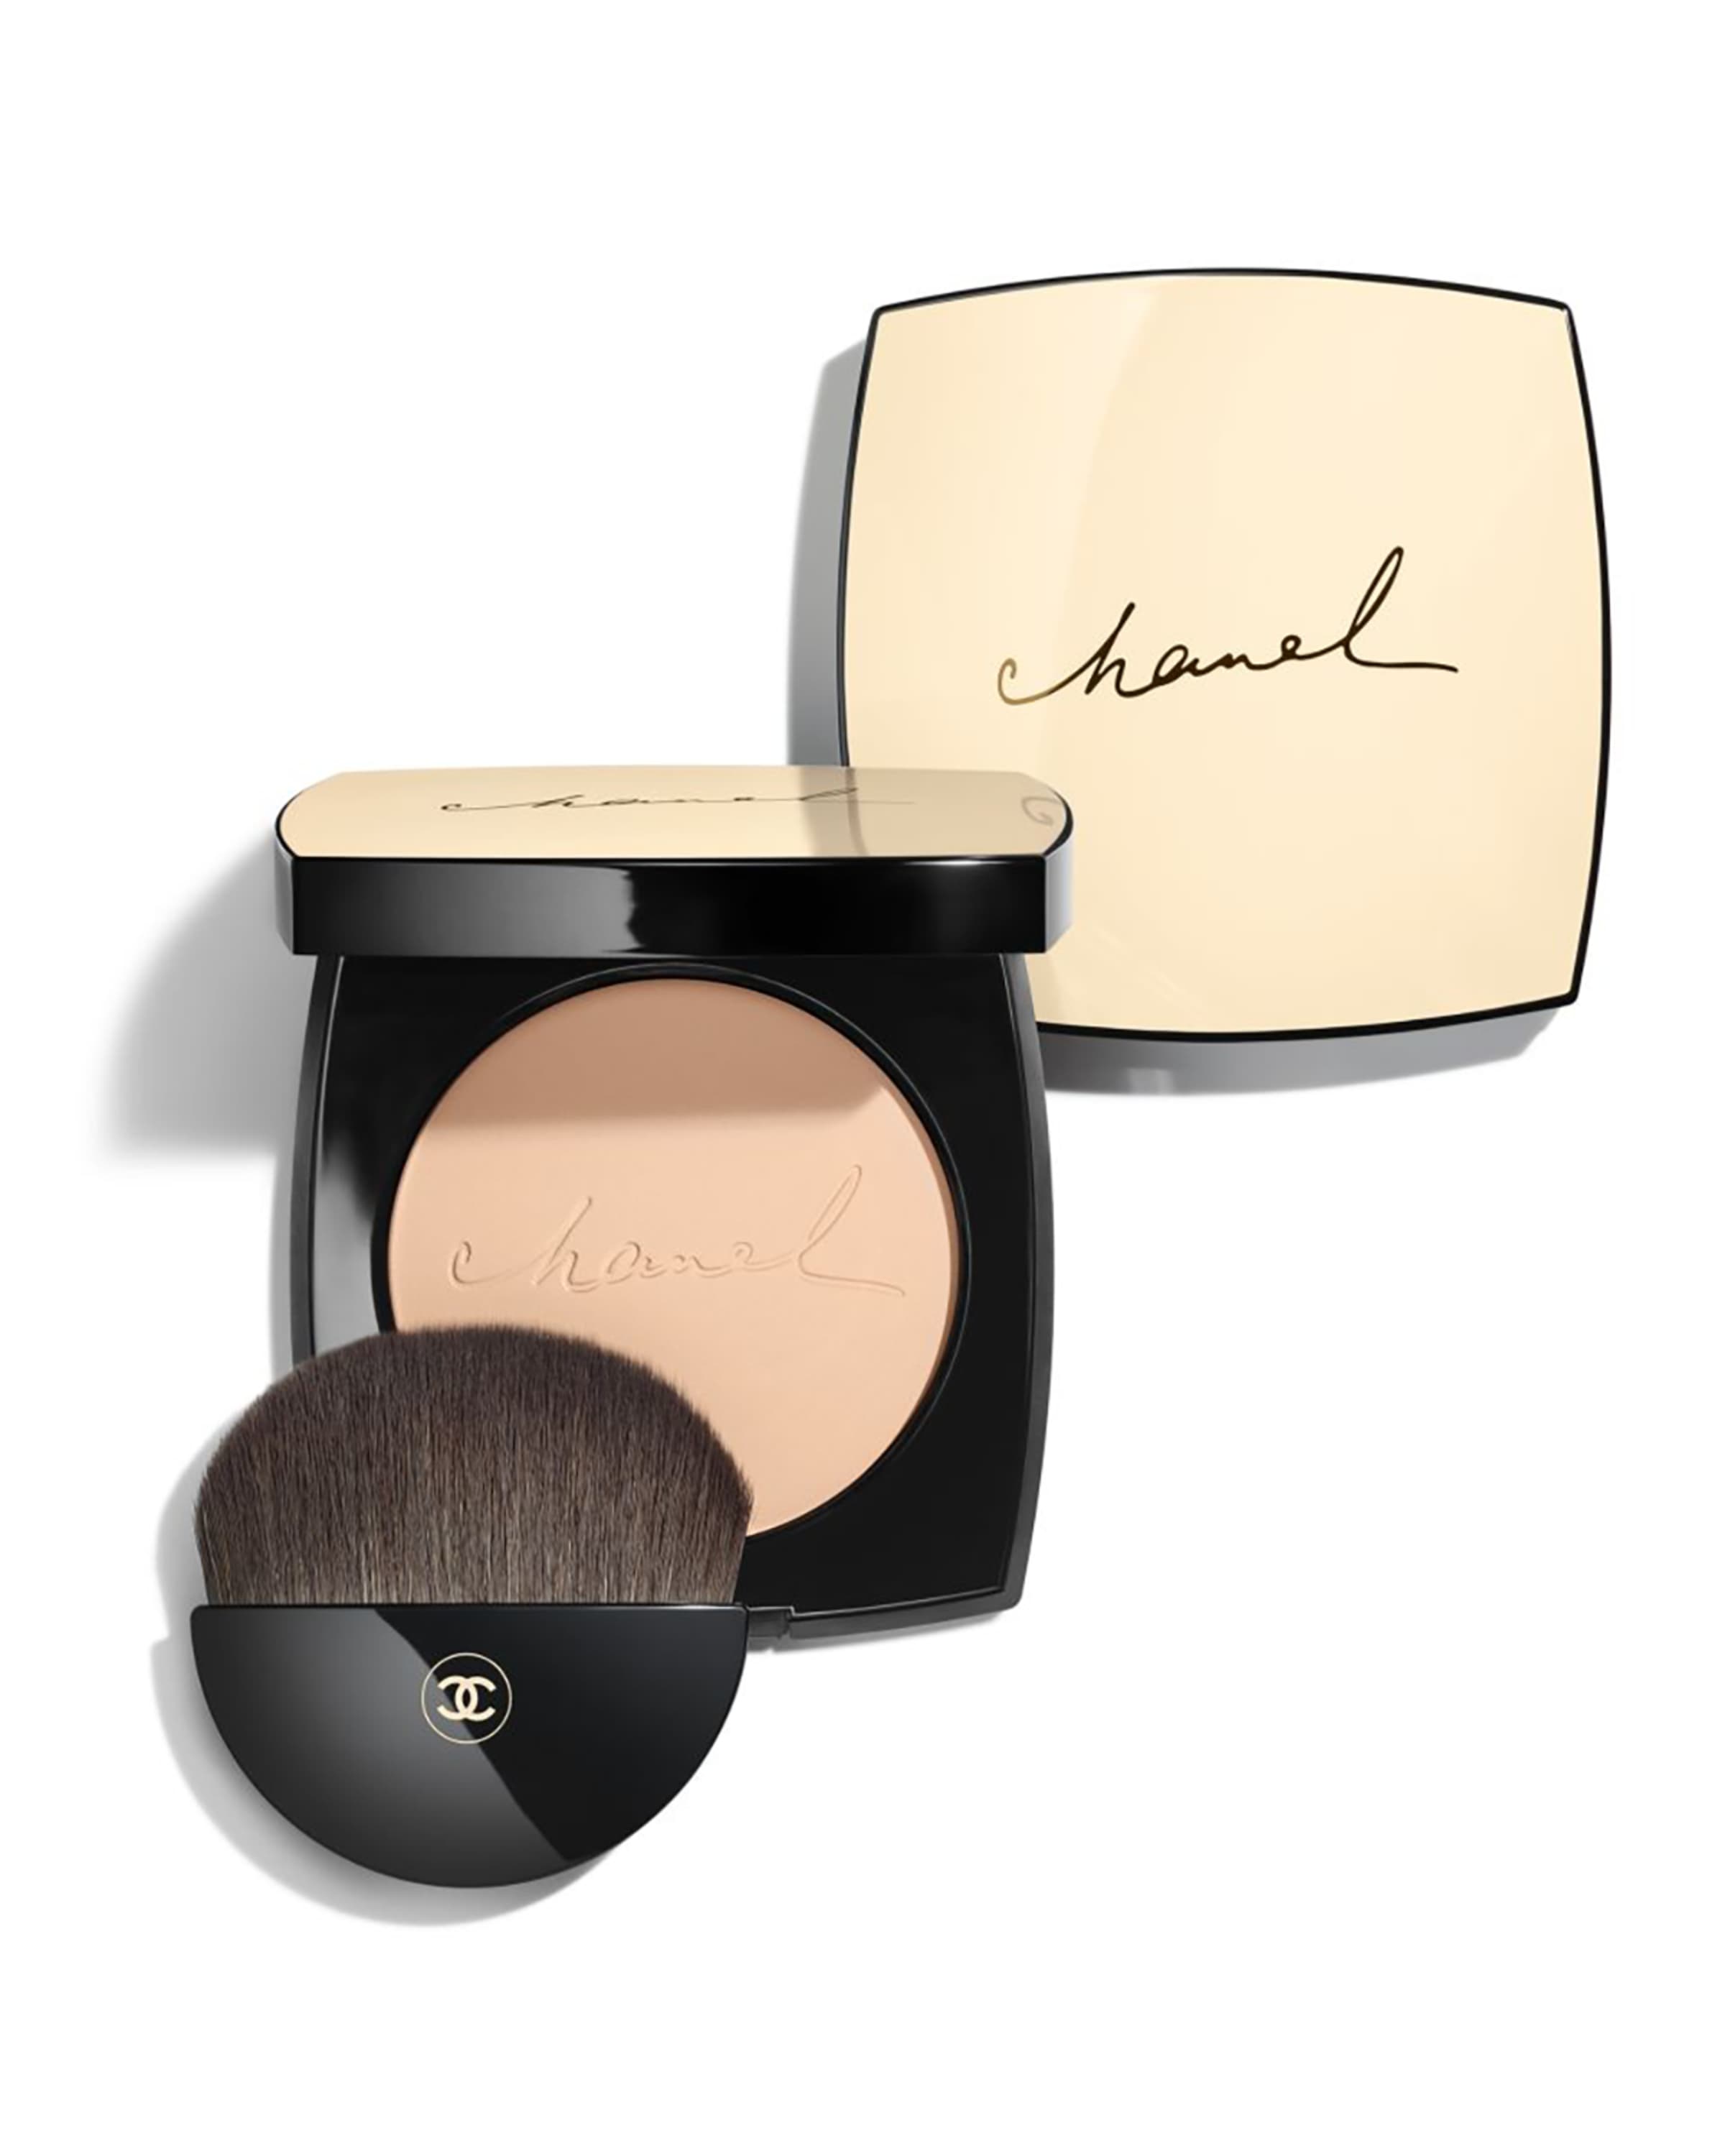 CHANEL LES BEIGES EXCLUSIVE CREATION GLOW SHEER POWDER | Marcus